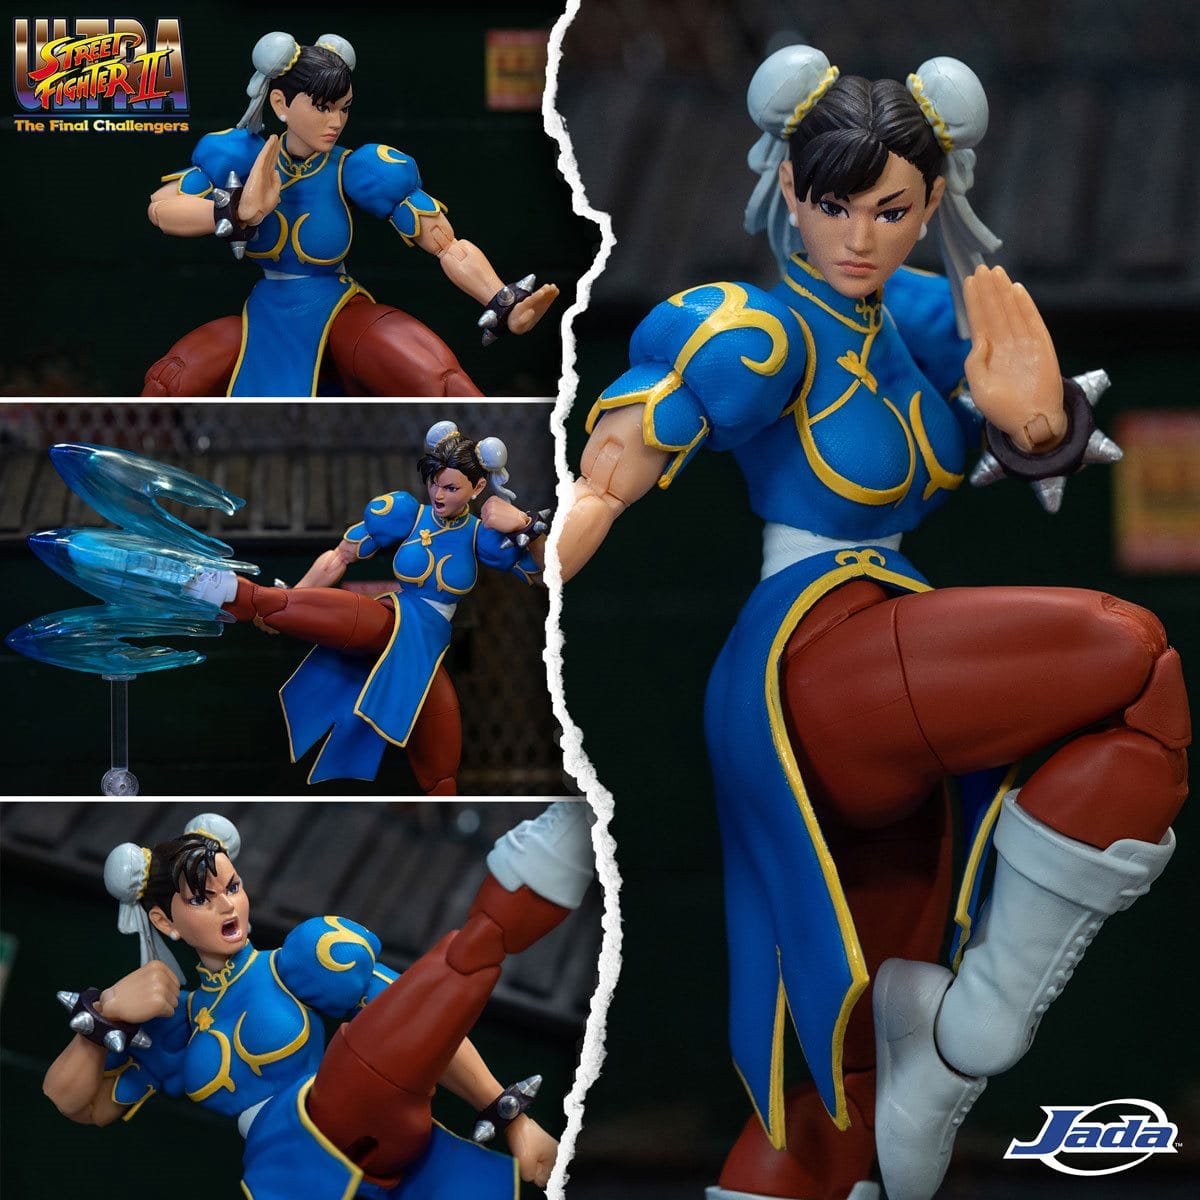 Ultra-Street-Fighter-II-Chun-Li6-Inch-Scale-Action-Figure-toys-pose-collectible